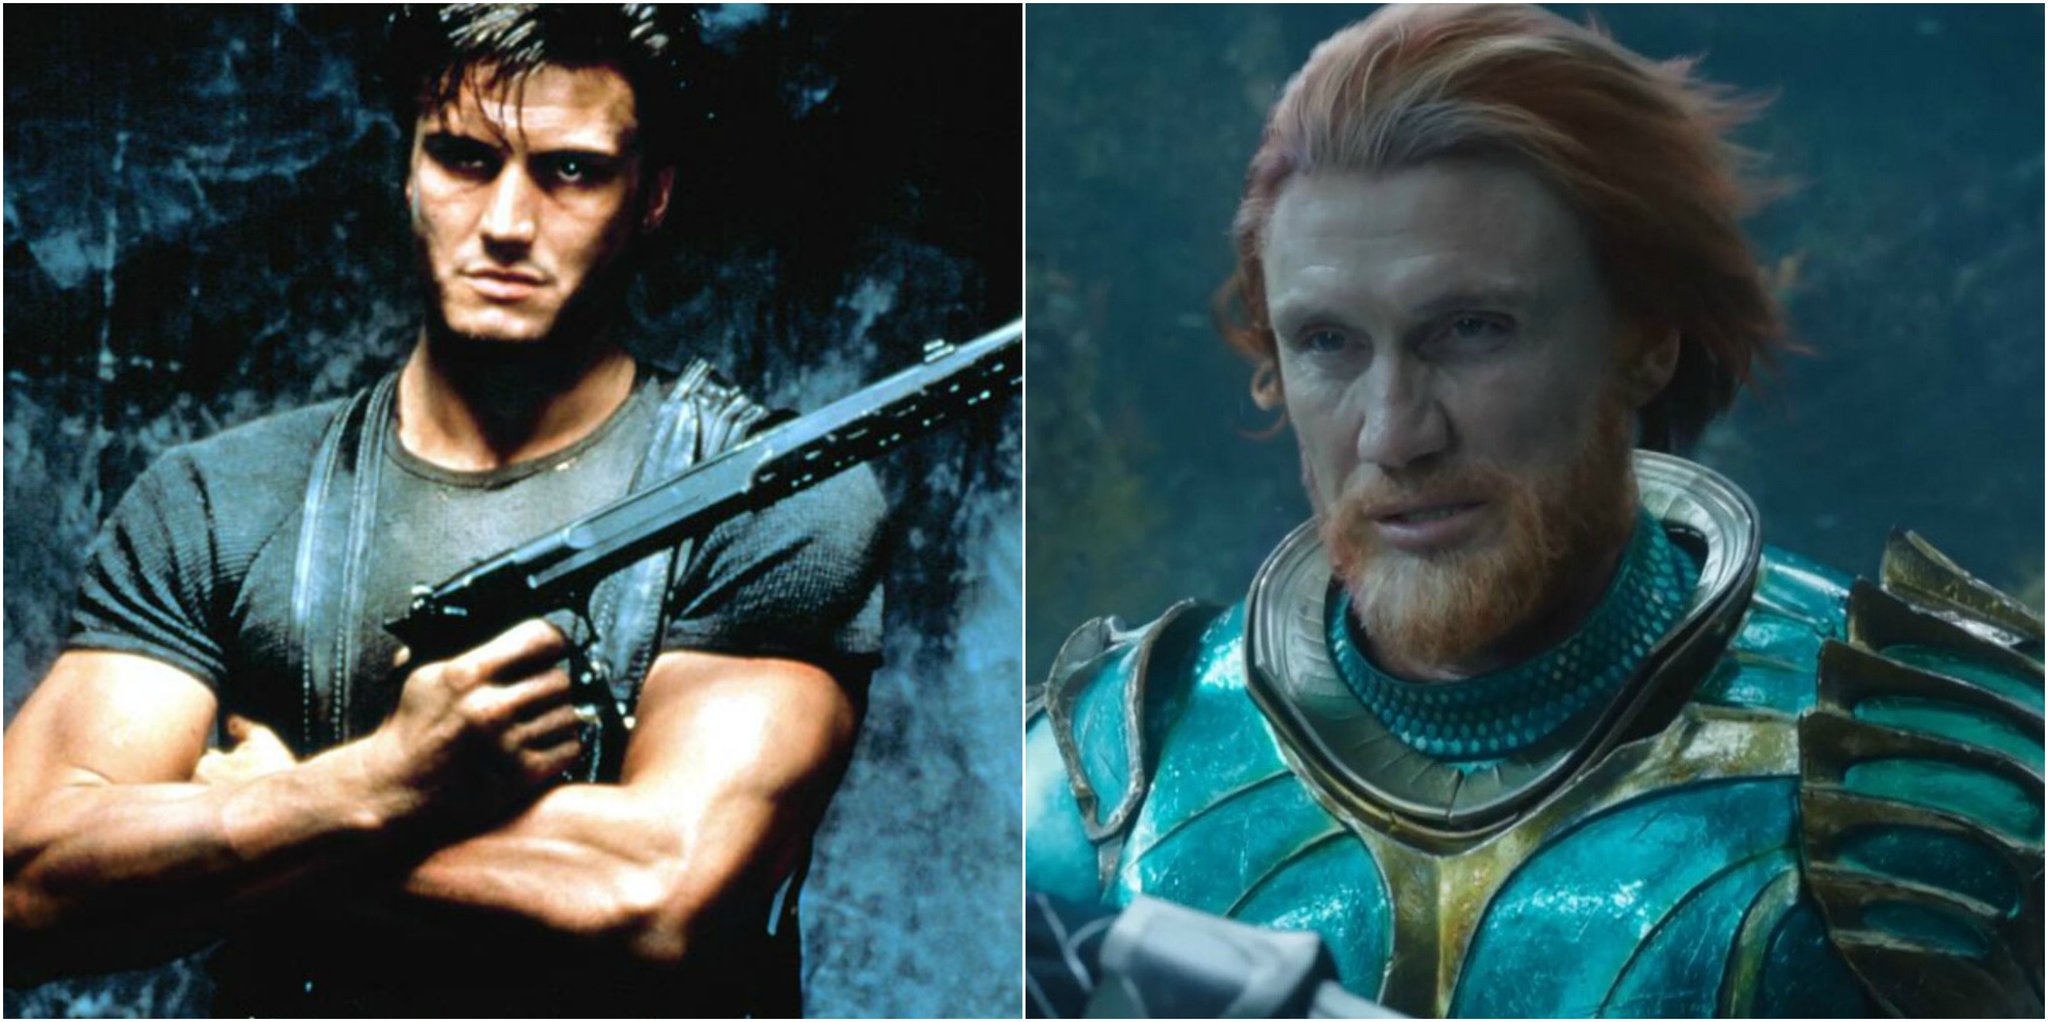 From The Punisher to King Nereus Of Atlantis!!! Today we wish Dolph Lundgren a very happy 63rd birthday!!! 